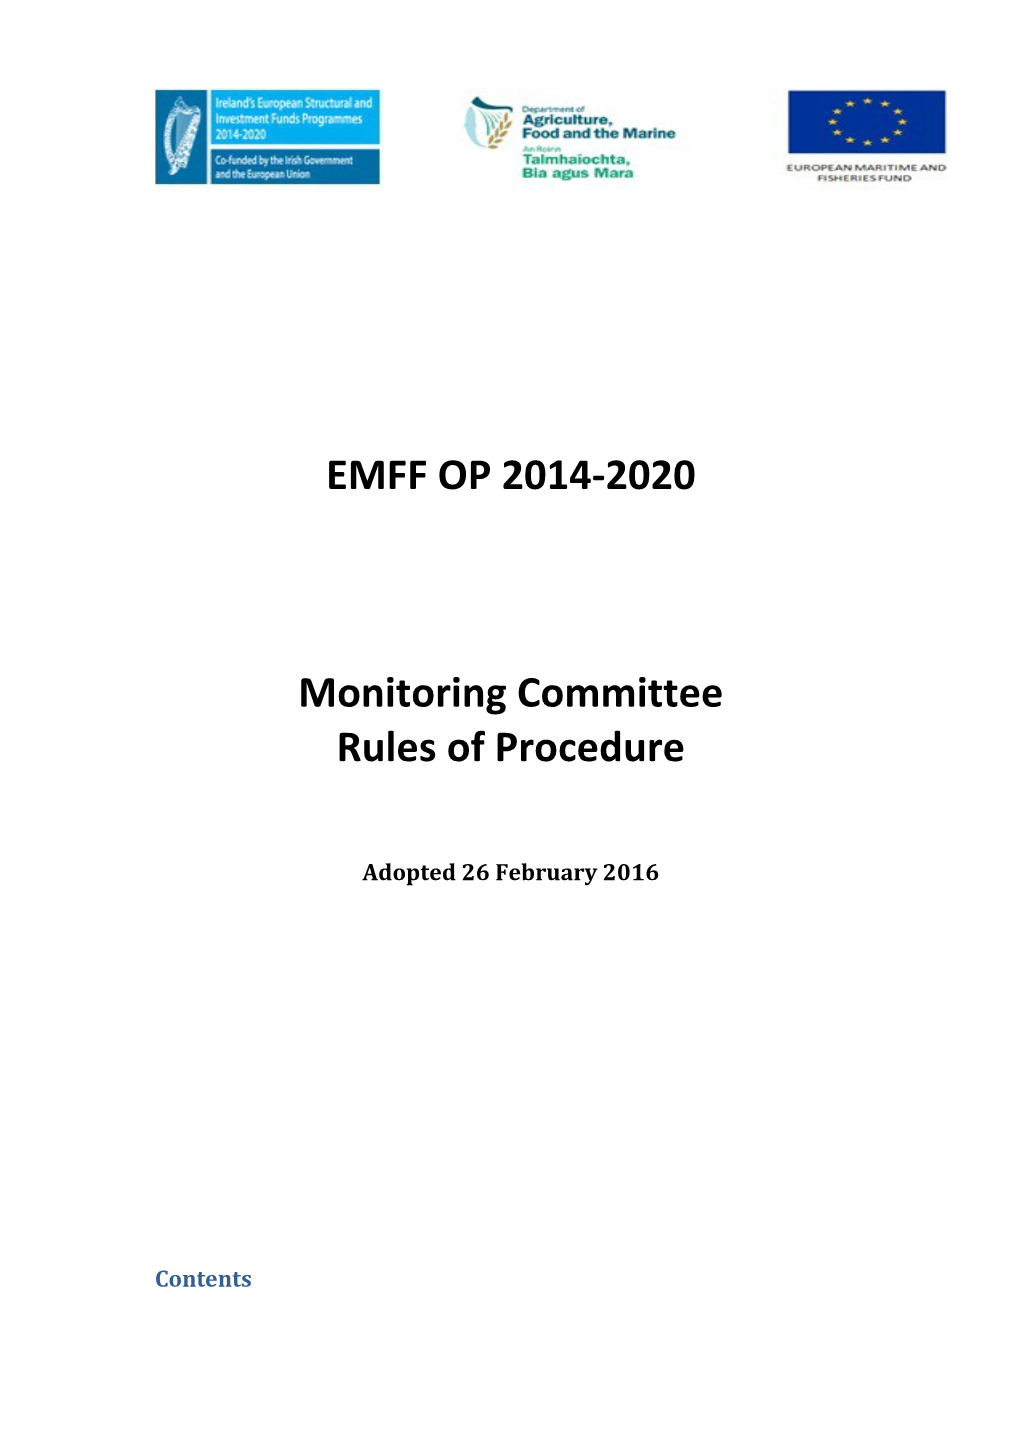 2. Functions of the Monitoring Committee